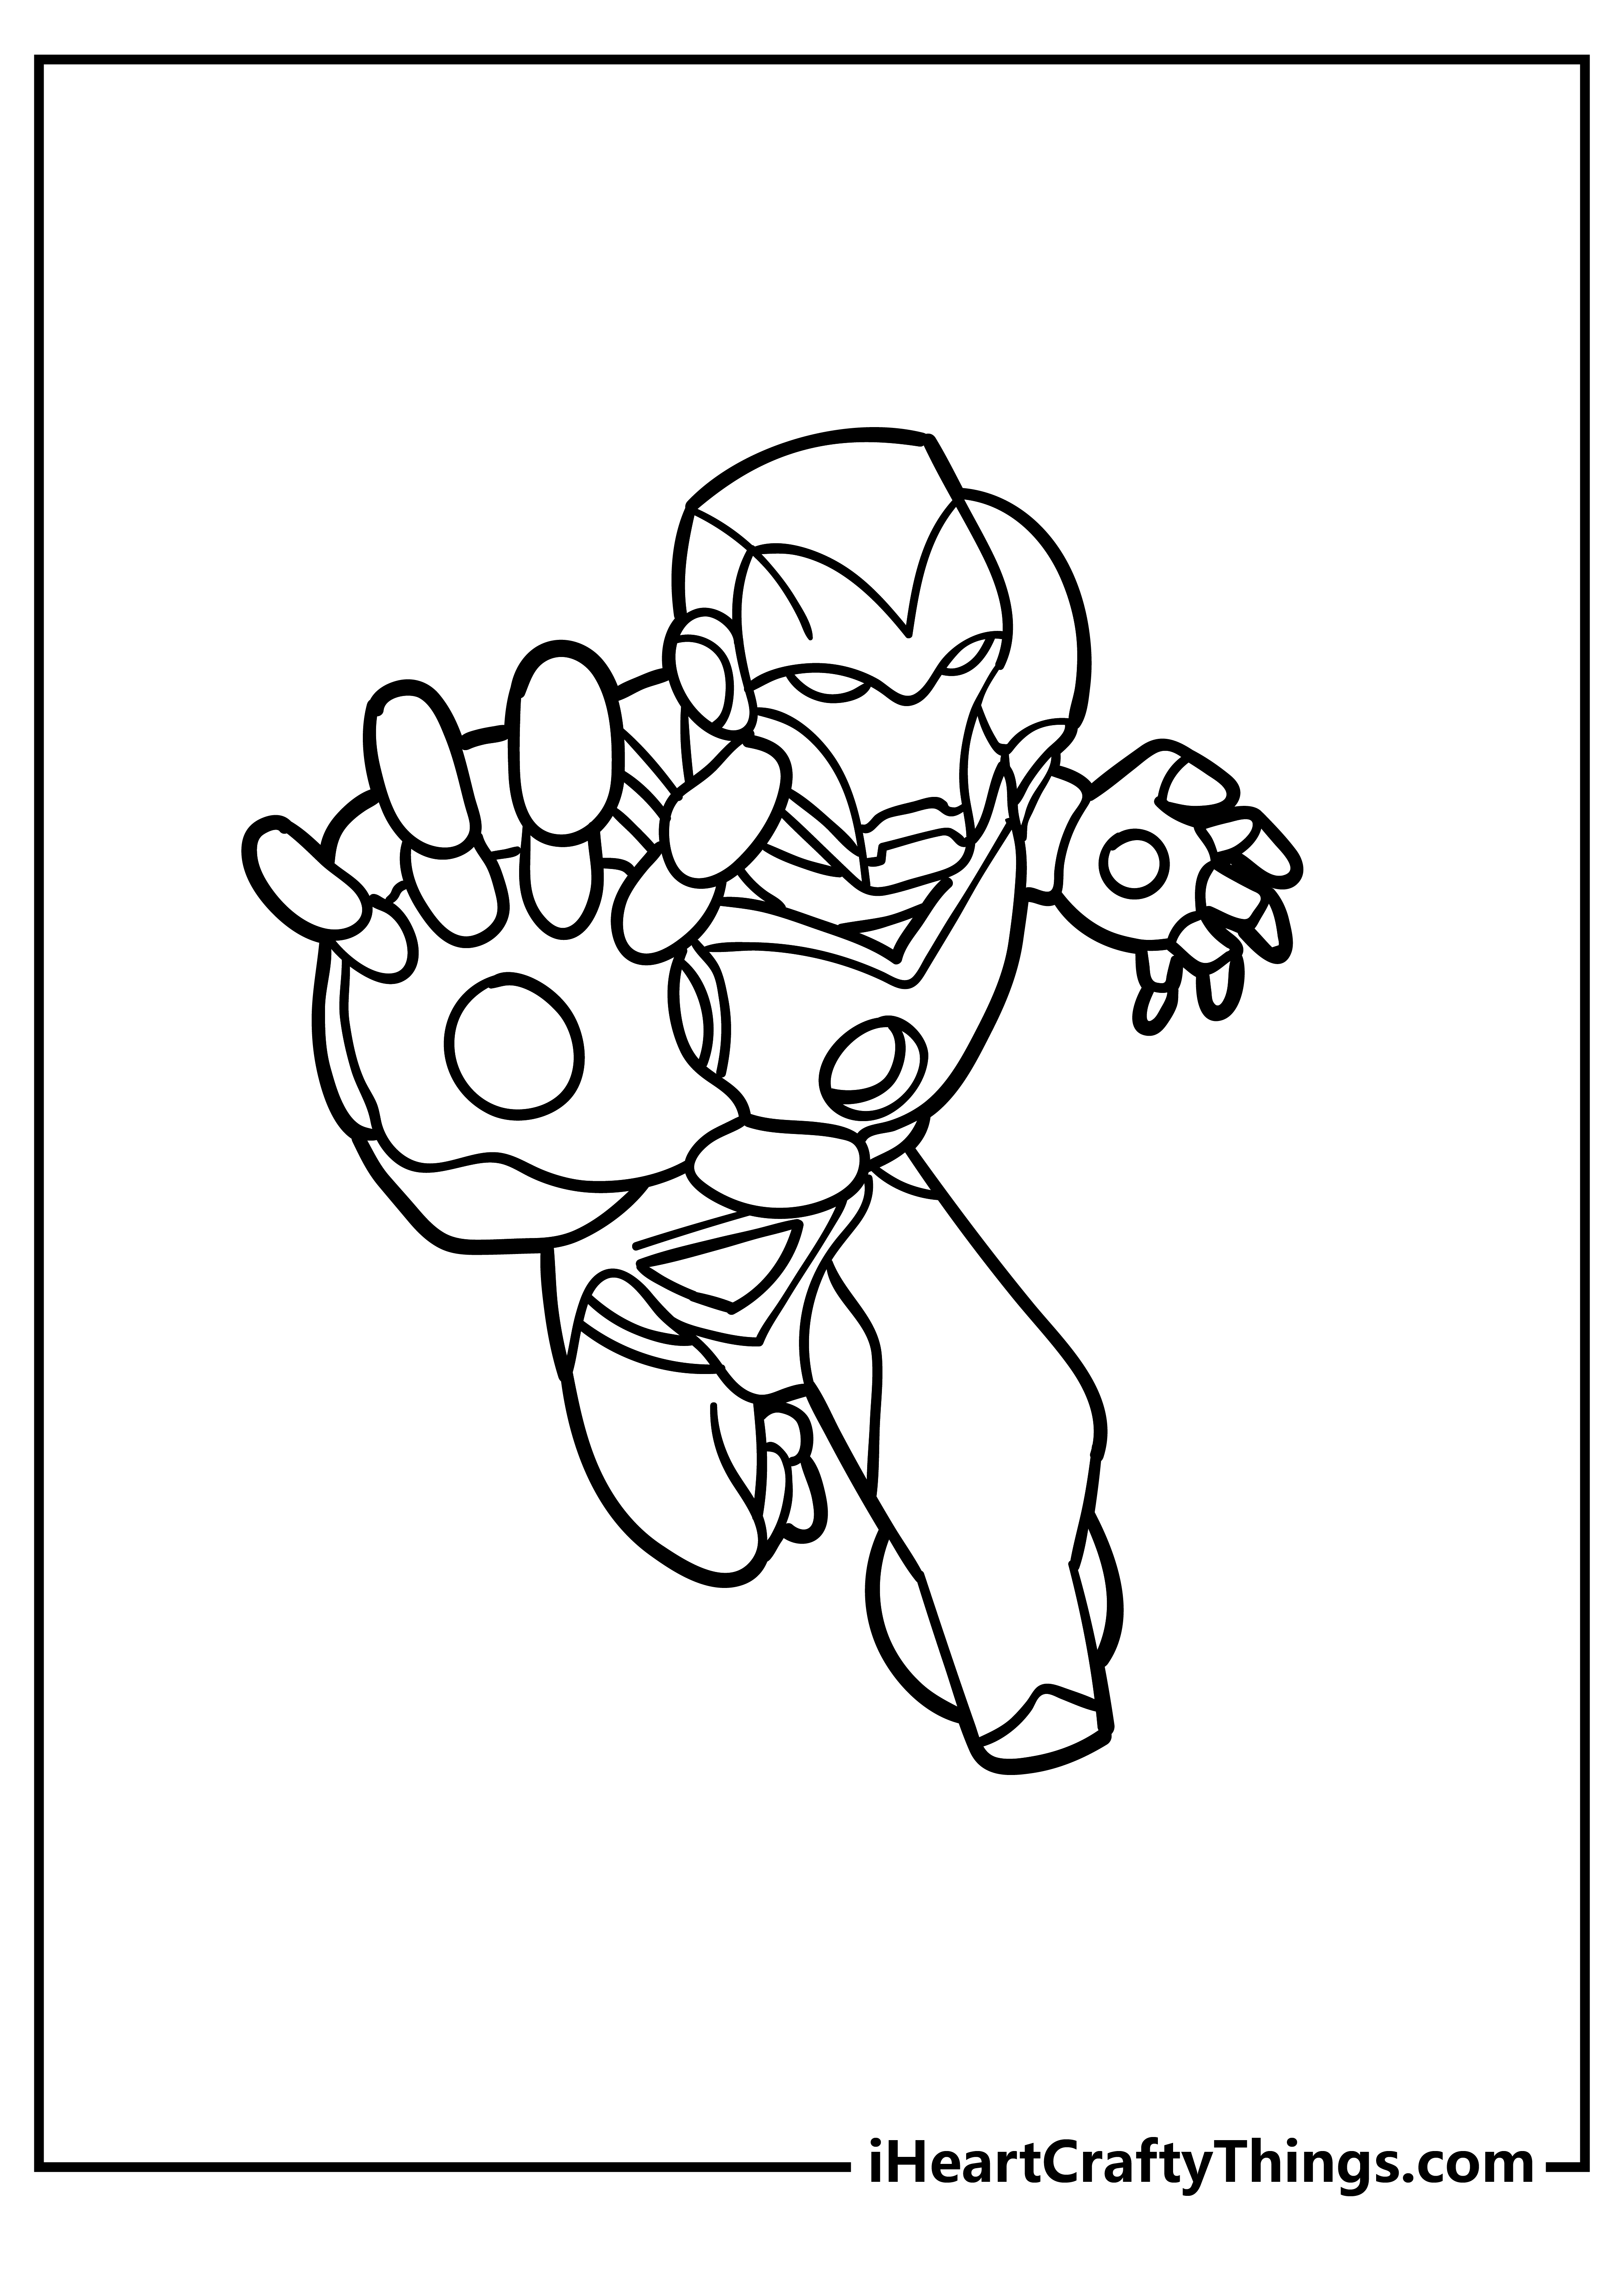 Printable Avengers Coloring Pages Updated 20